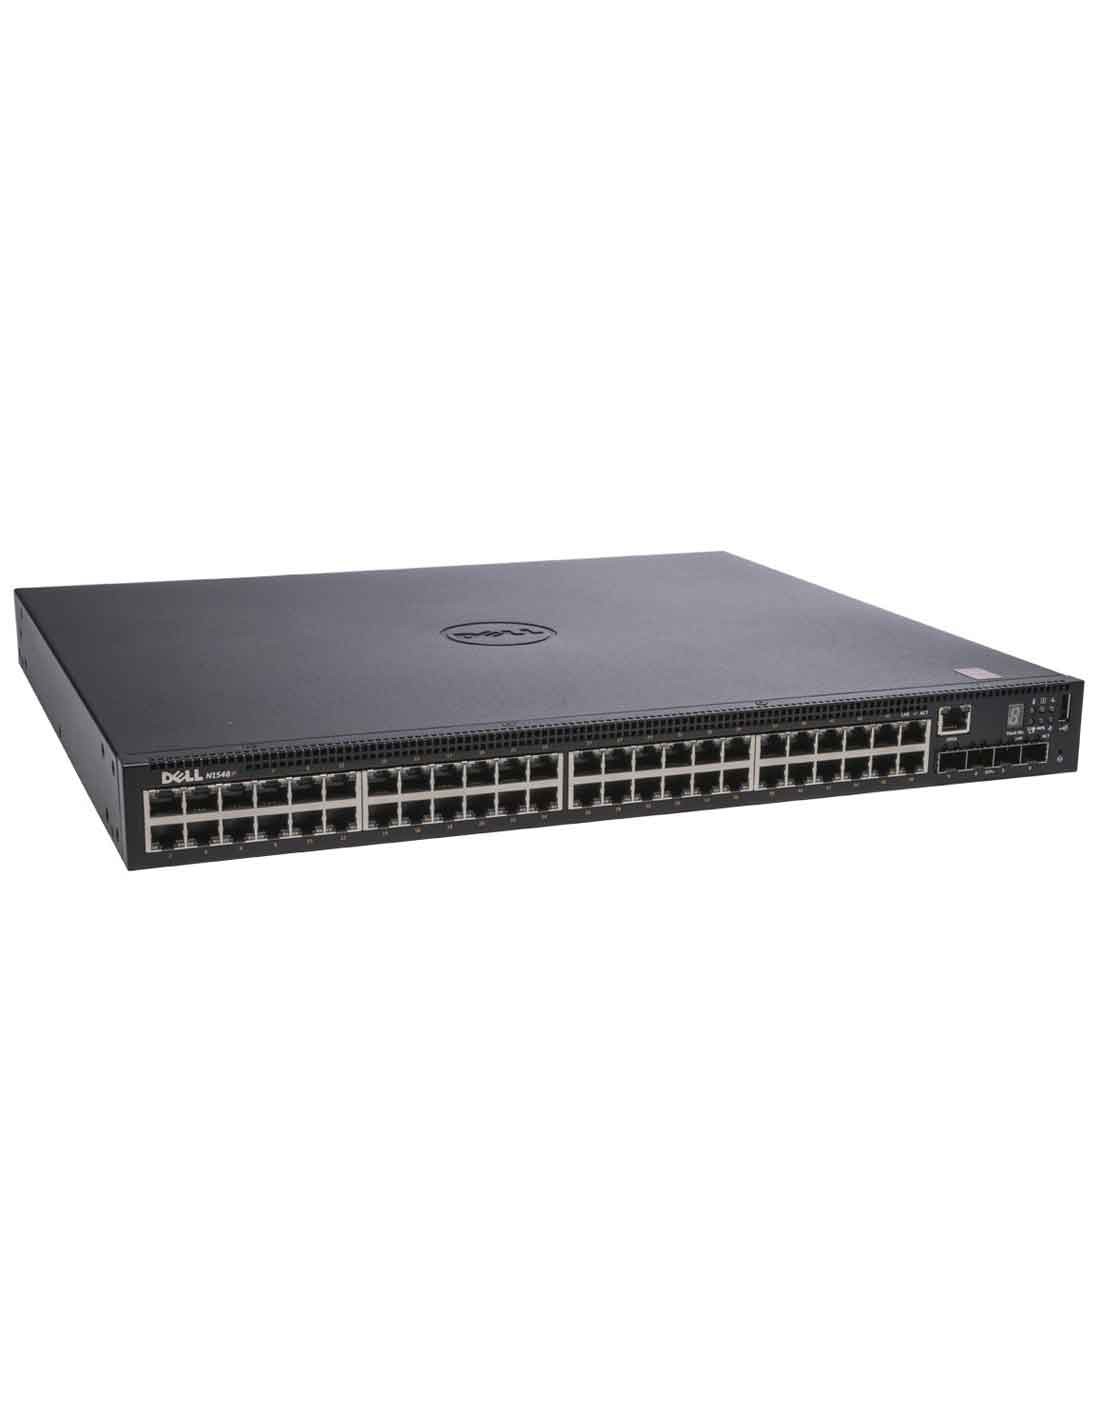 Dell Networking N1548P Switch at the cheapest price in Dubai UAE